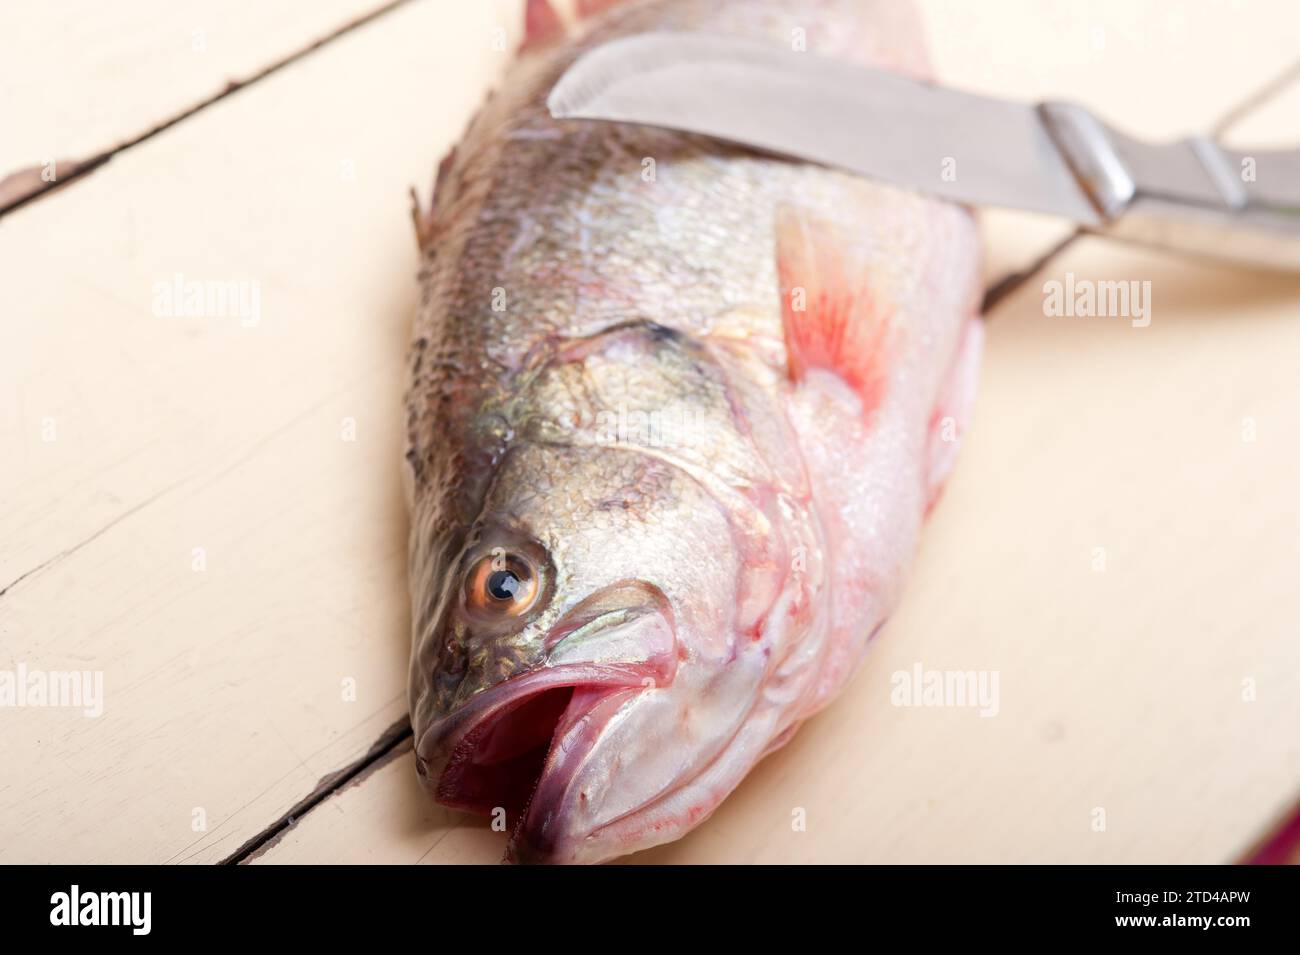 Fresh whole raw fish on a wooden table ready to cook Stock Photo